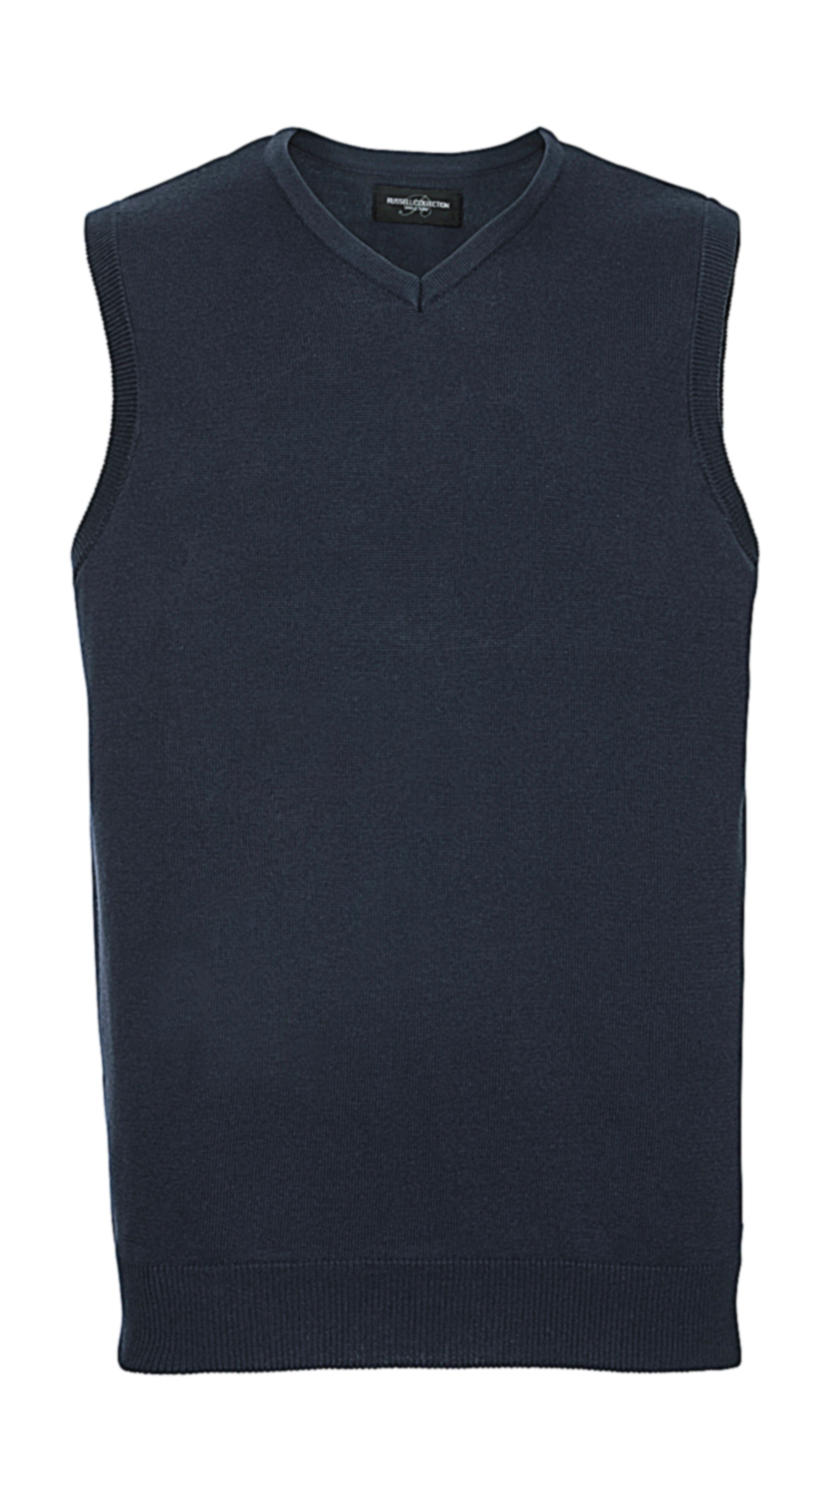  Adults V-Neck Sleeveless Knitted Pullover in Farbe French Navy